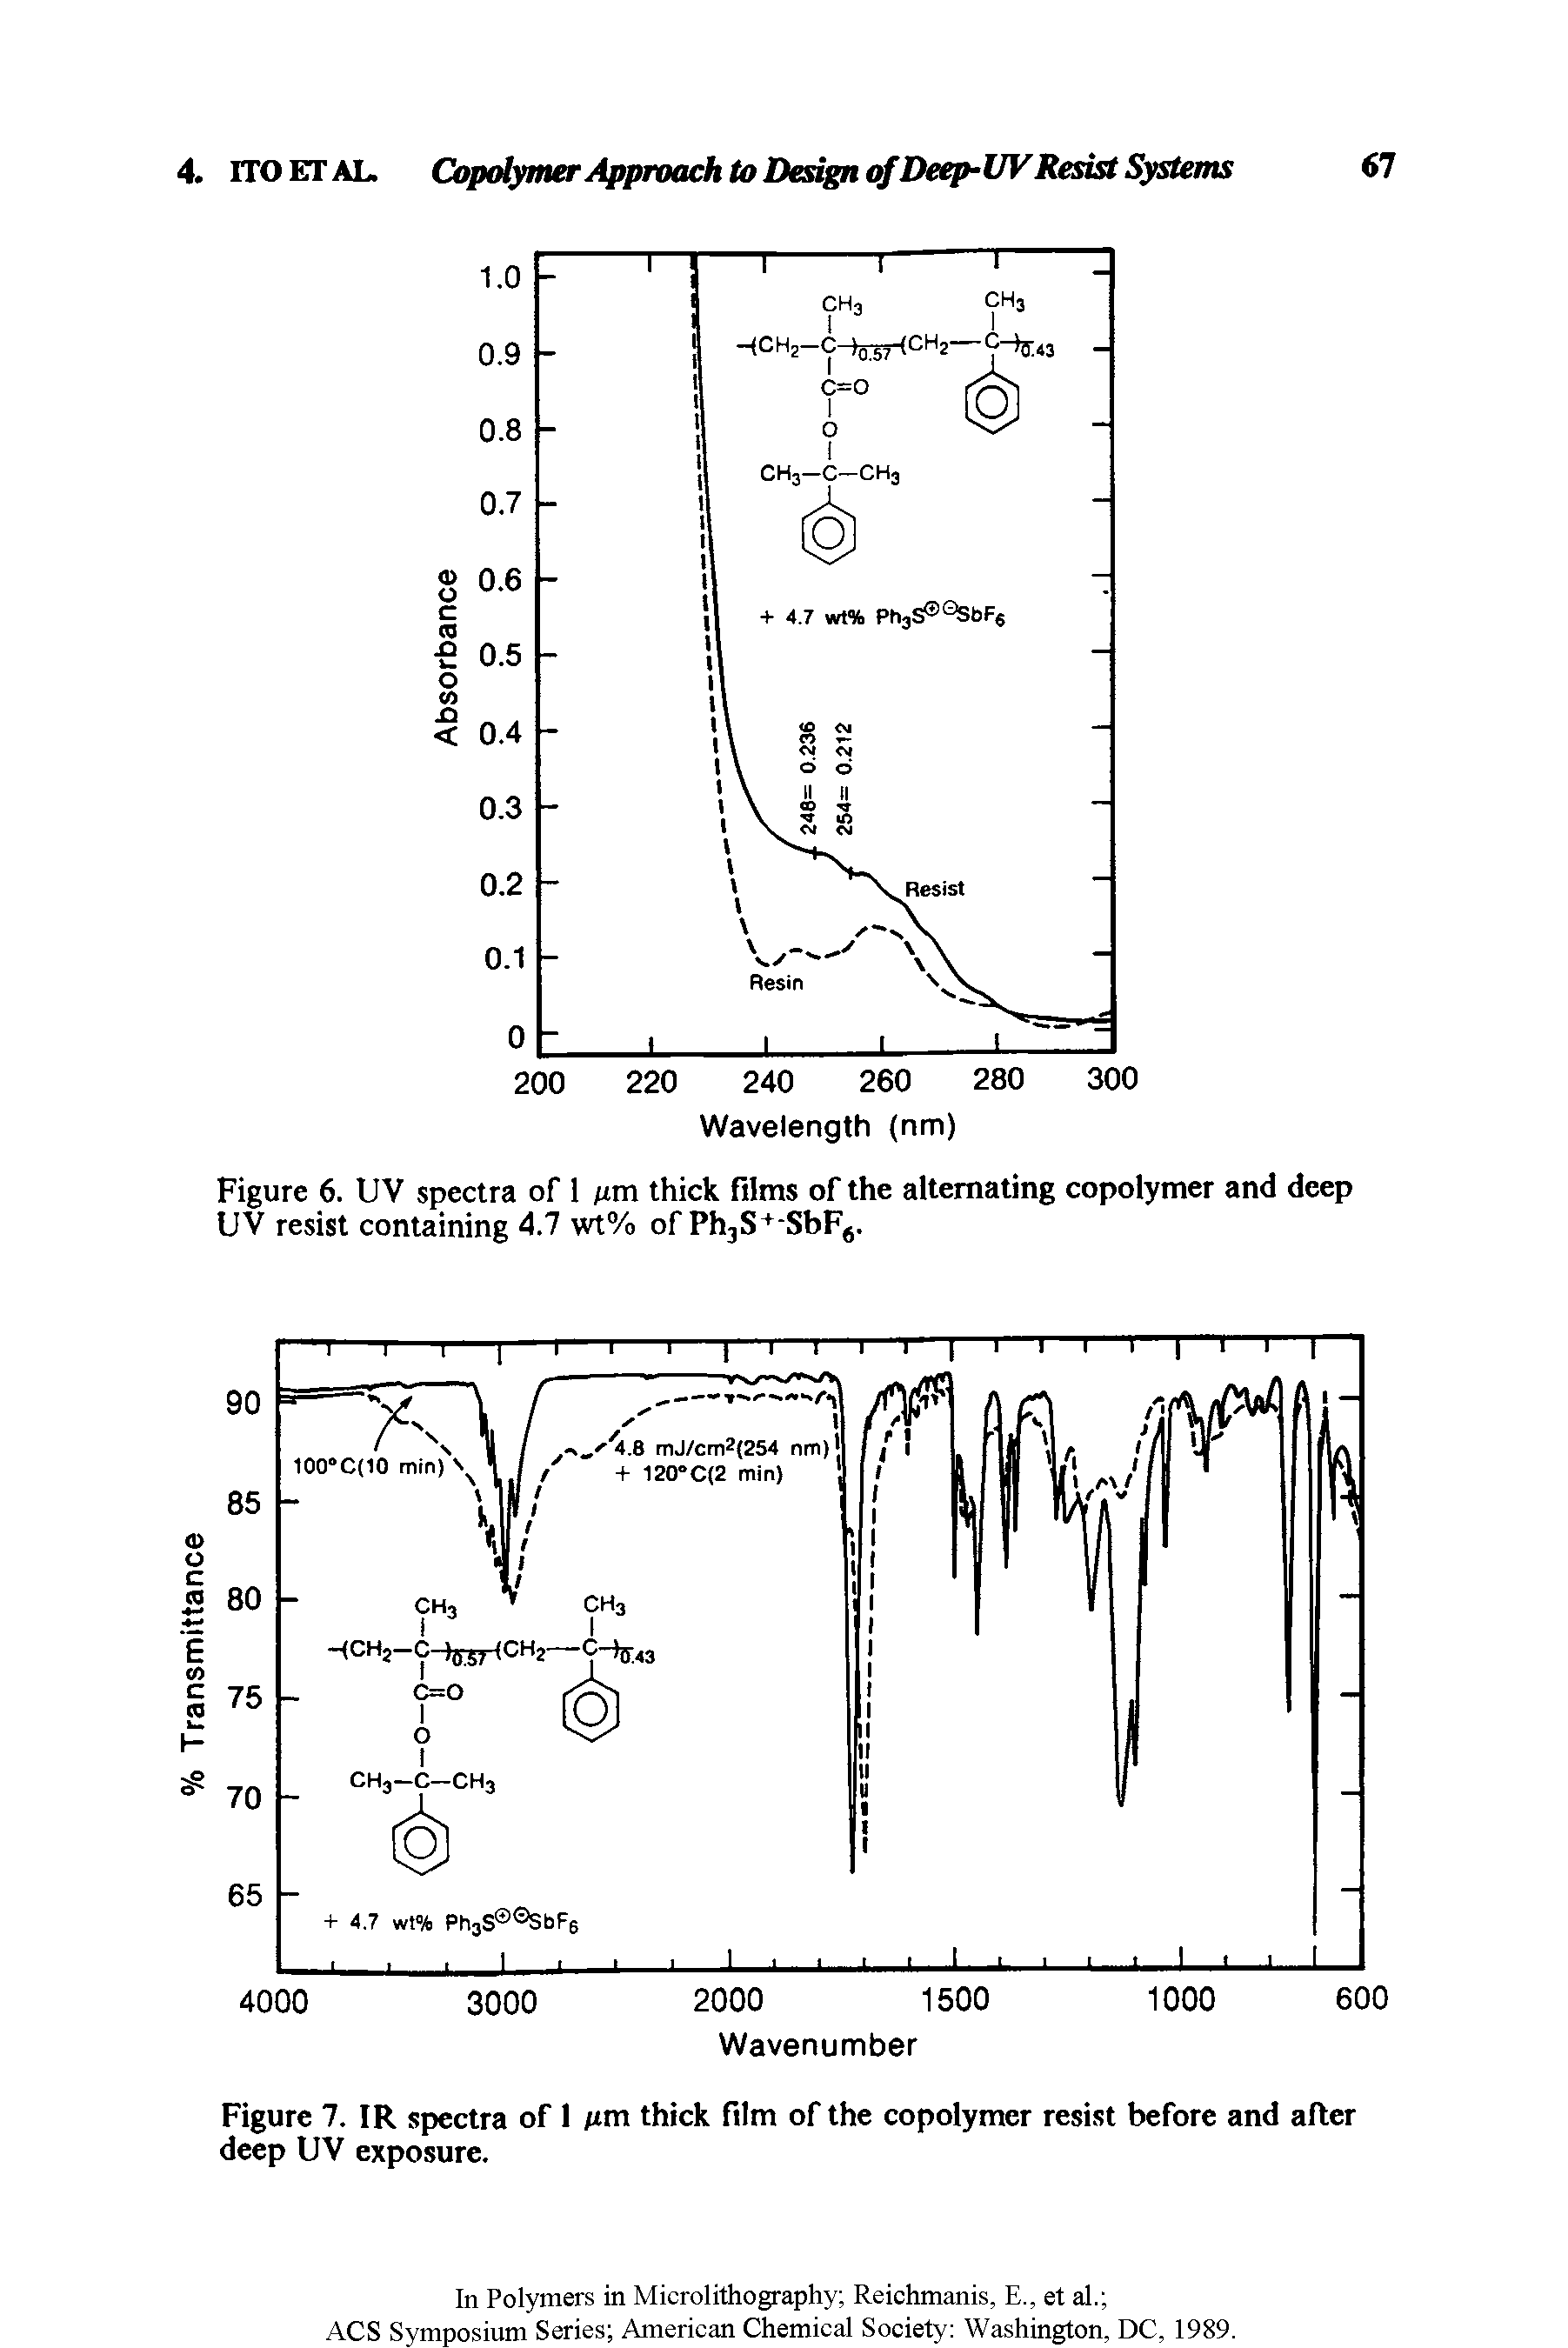 Figure 6. UV spectra of 1 nm thick films of the alternating copolymer and deep UV resist containing 4.7 wt% of Ph3S+-SbF. ...